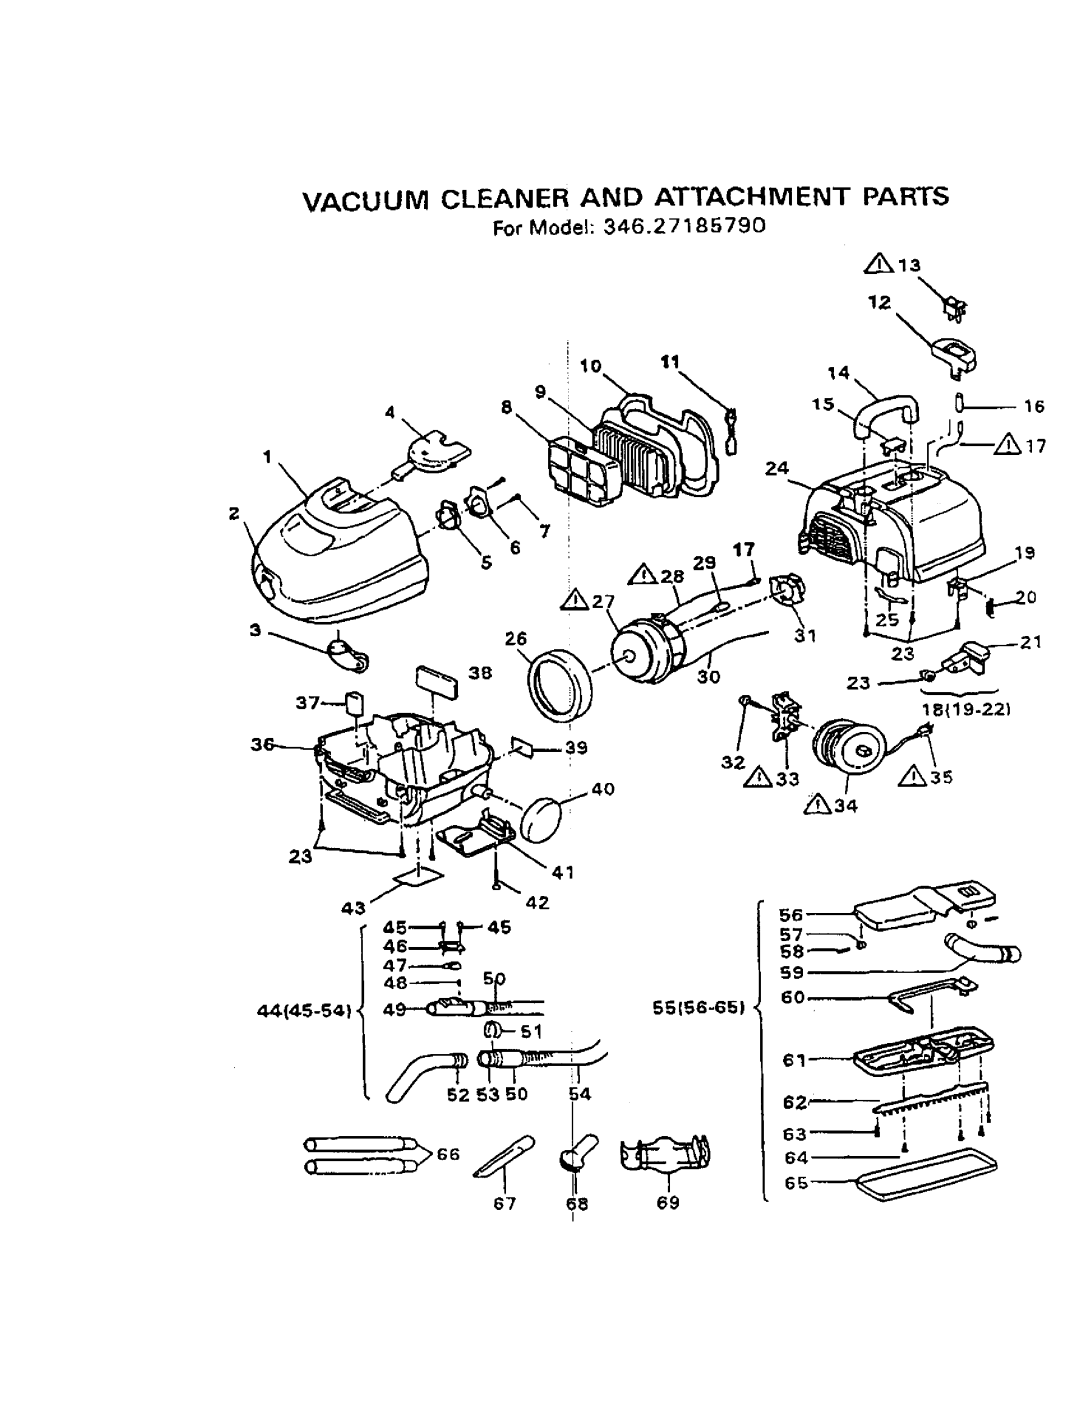 Kenmore 346.2718579 owner manual VACUUM CLEANER AND ATTACHMENT PARTs, Fo Model 346.2, 71,85790, 1o fl 